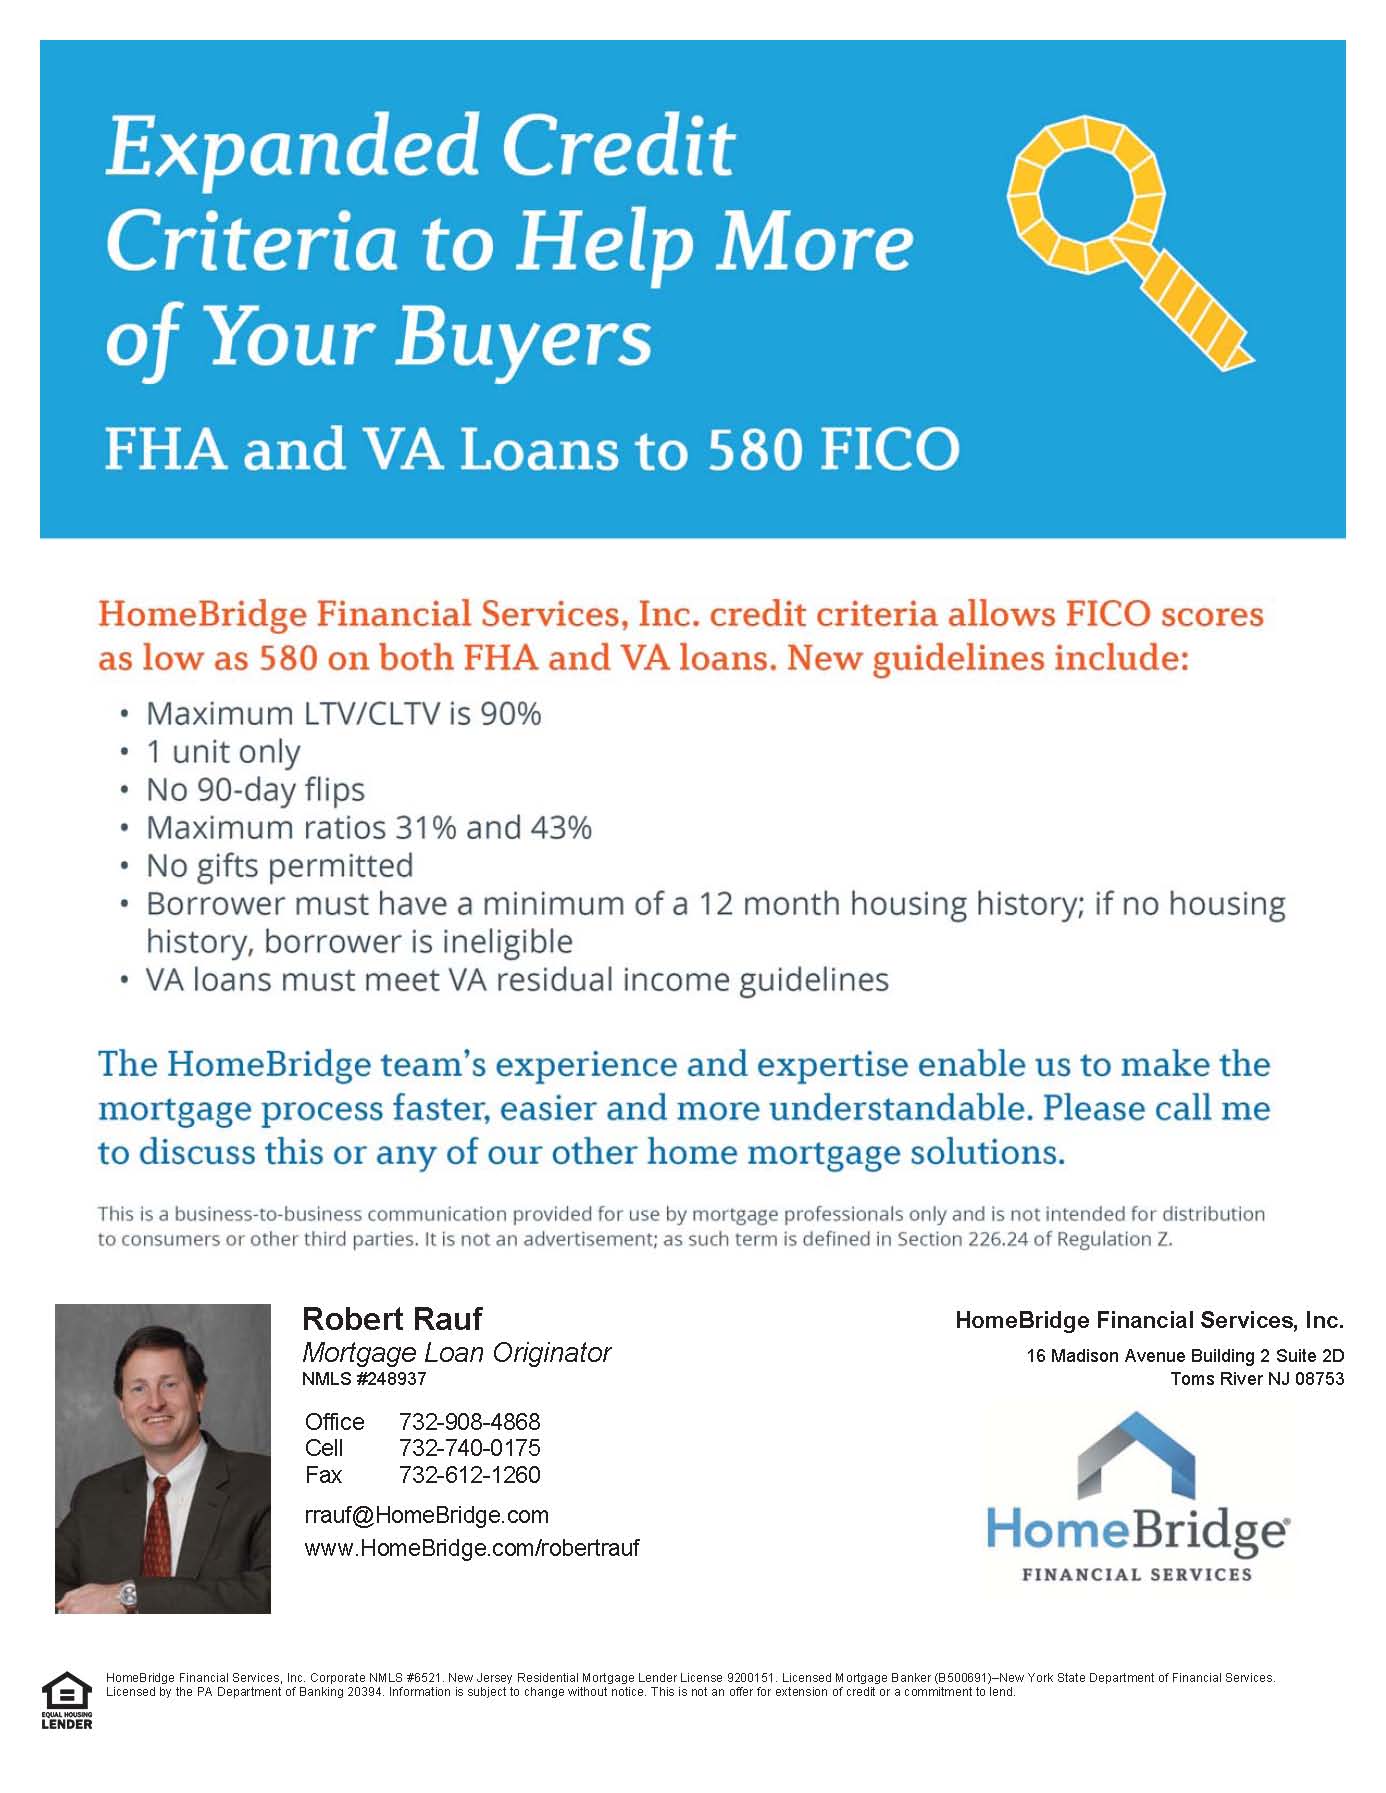 FHA and VA loans Down to a 580 Credit score!